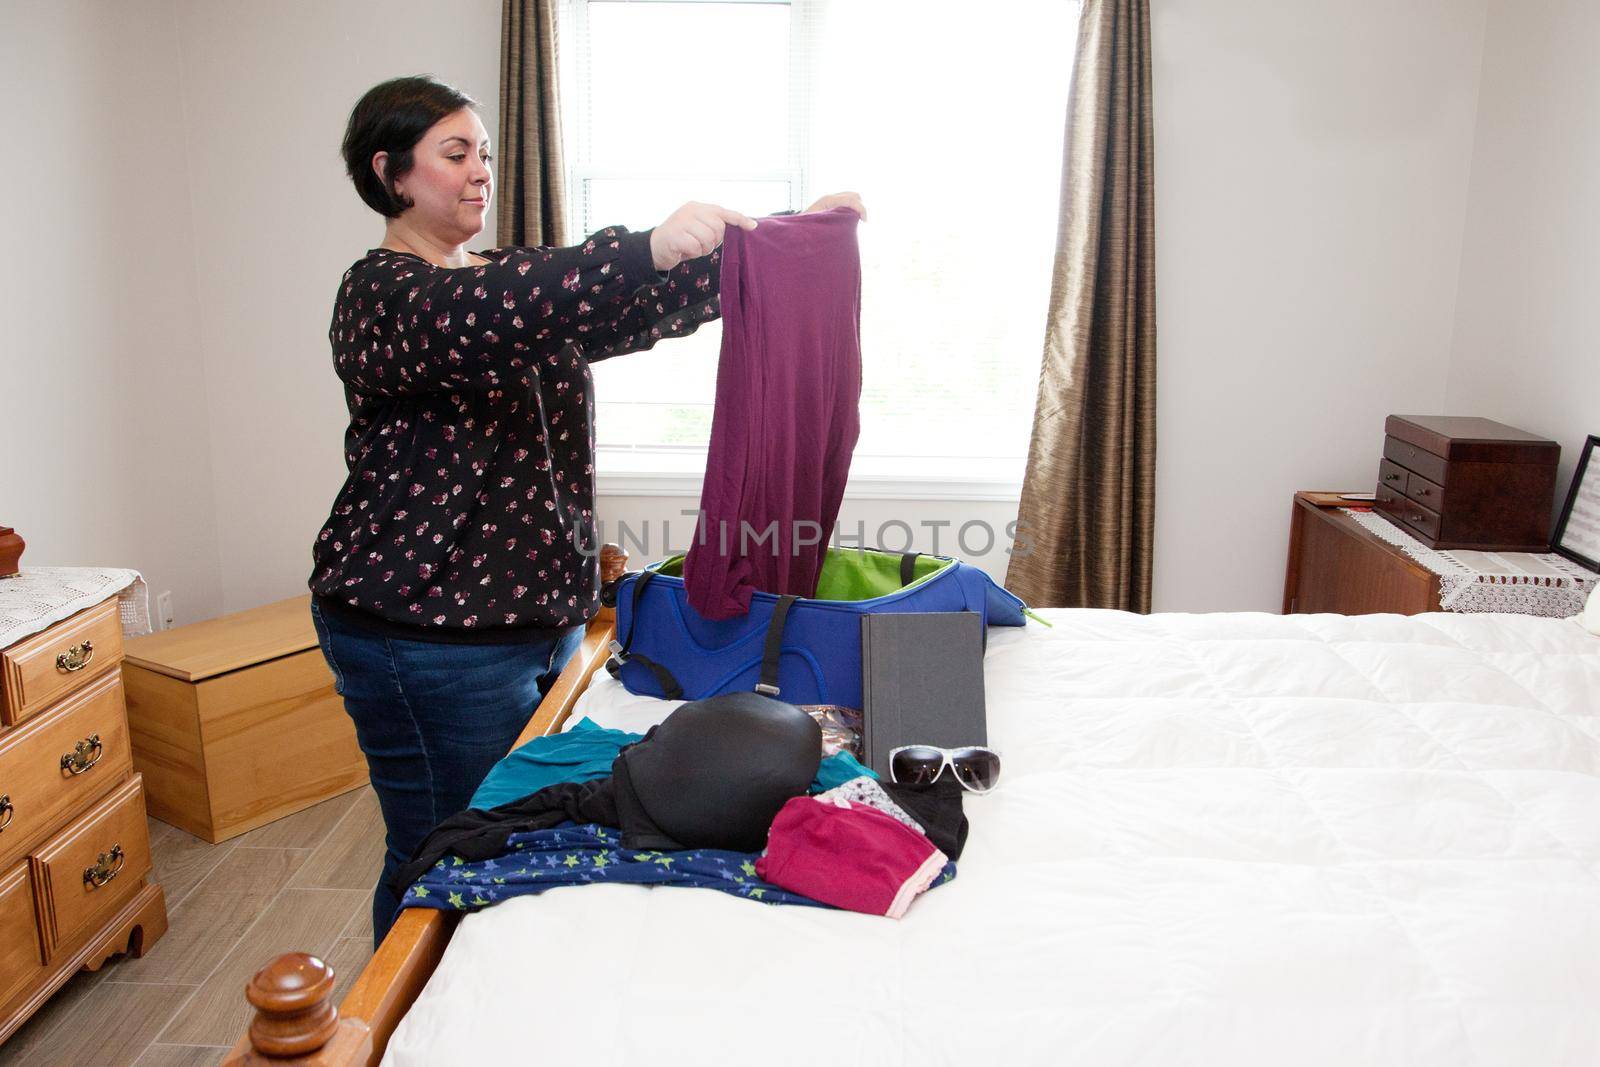 Folding clothes into a suitcase, a woman smiles as she prepares for a journey 